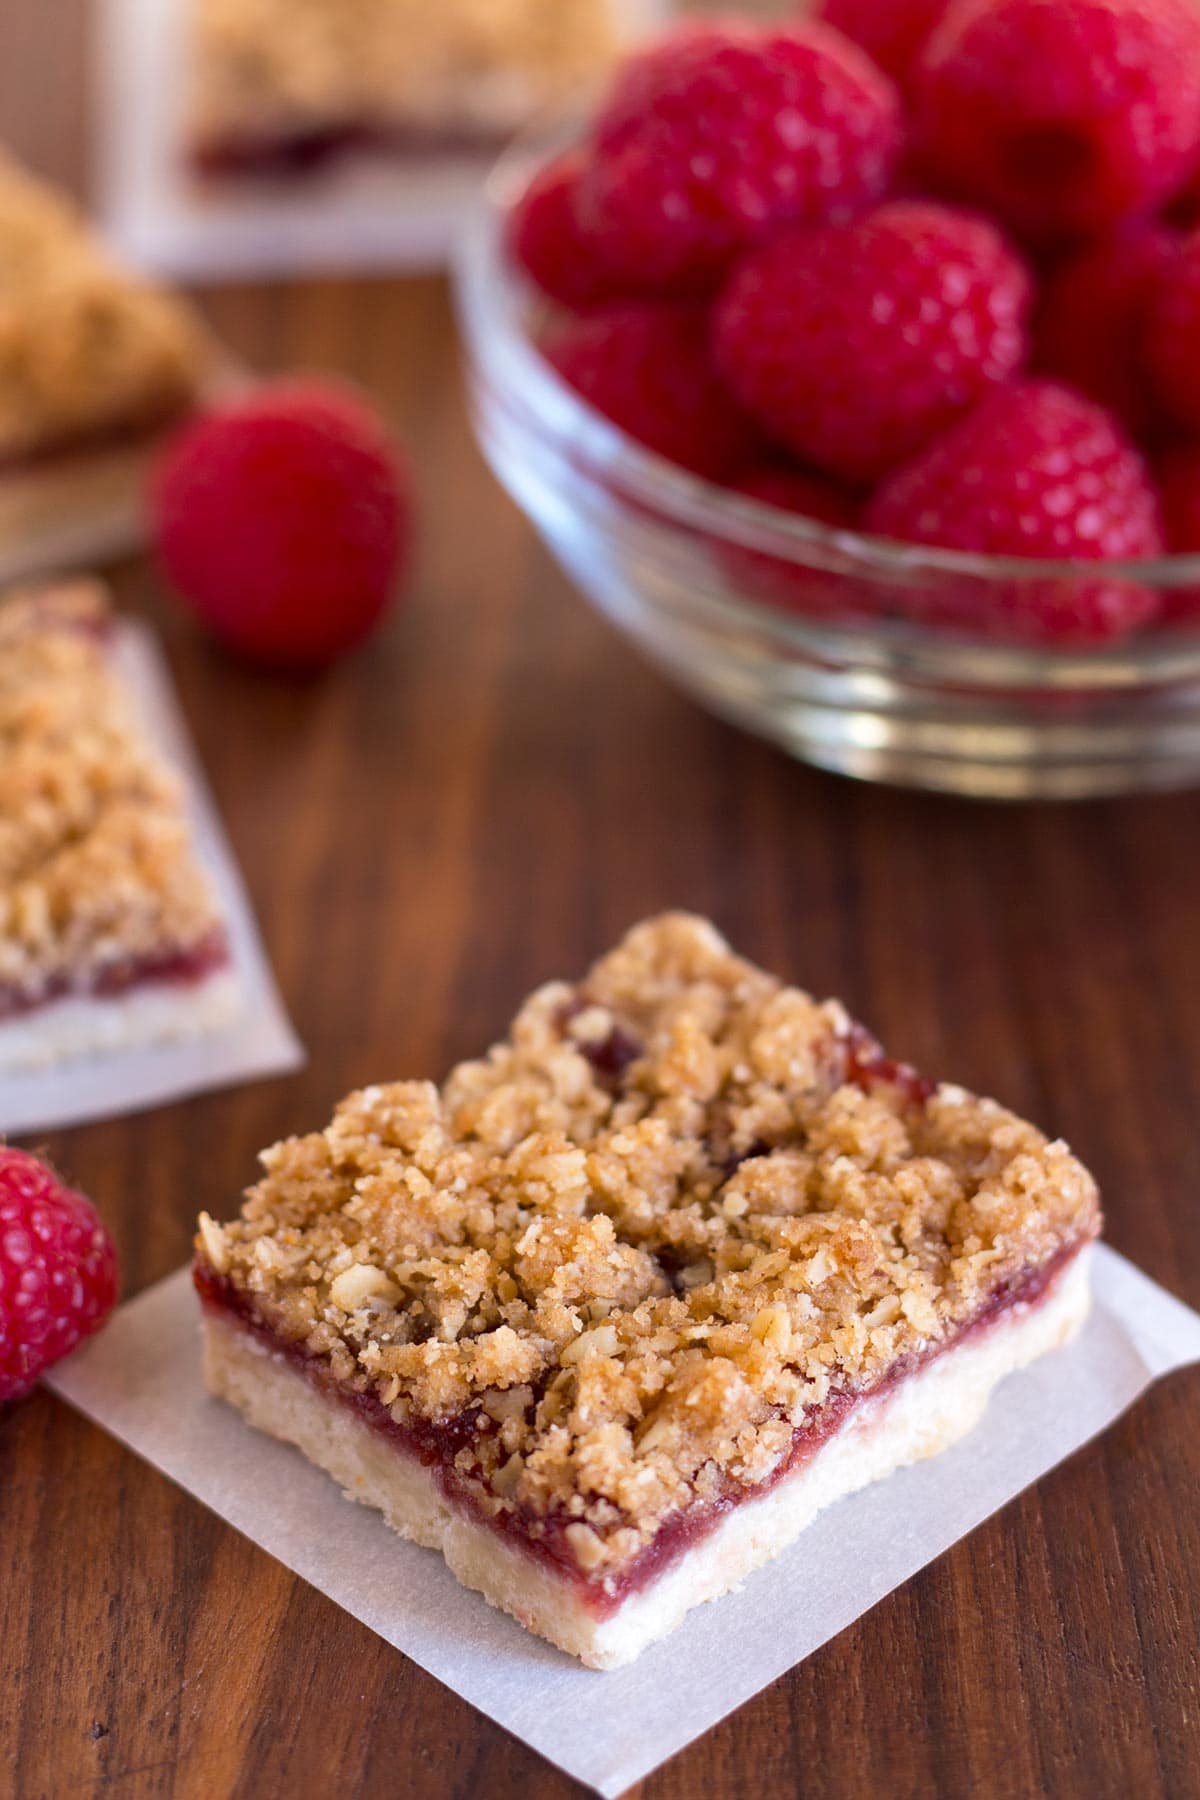 Raspberry bars with oat topping on parchment square with fresh raspberries in the background.